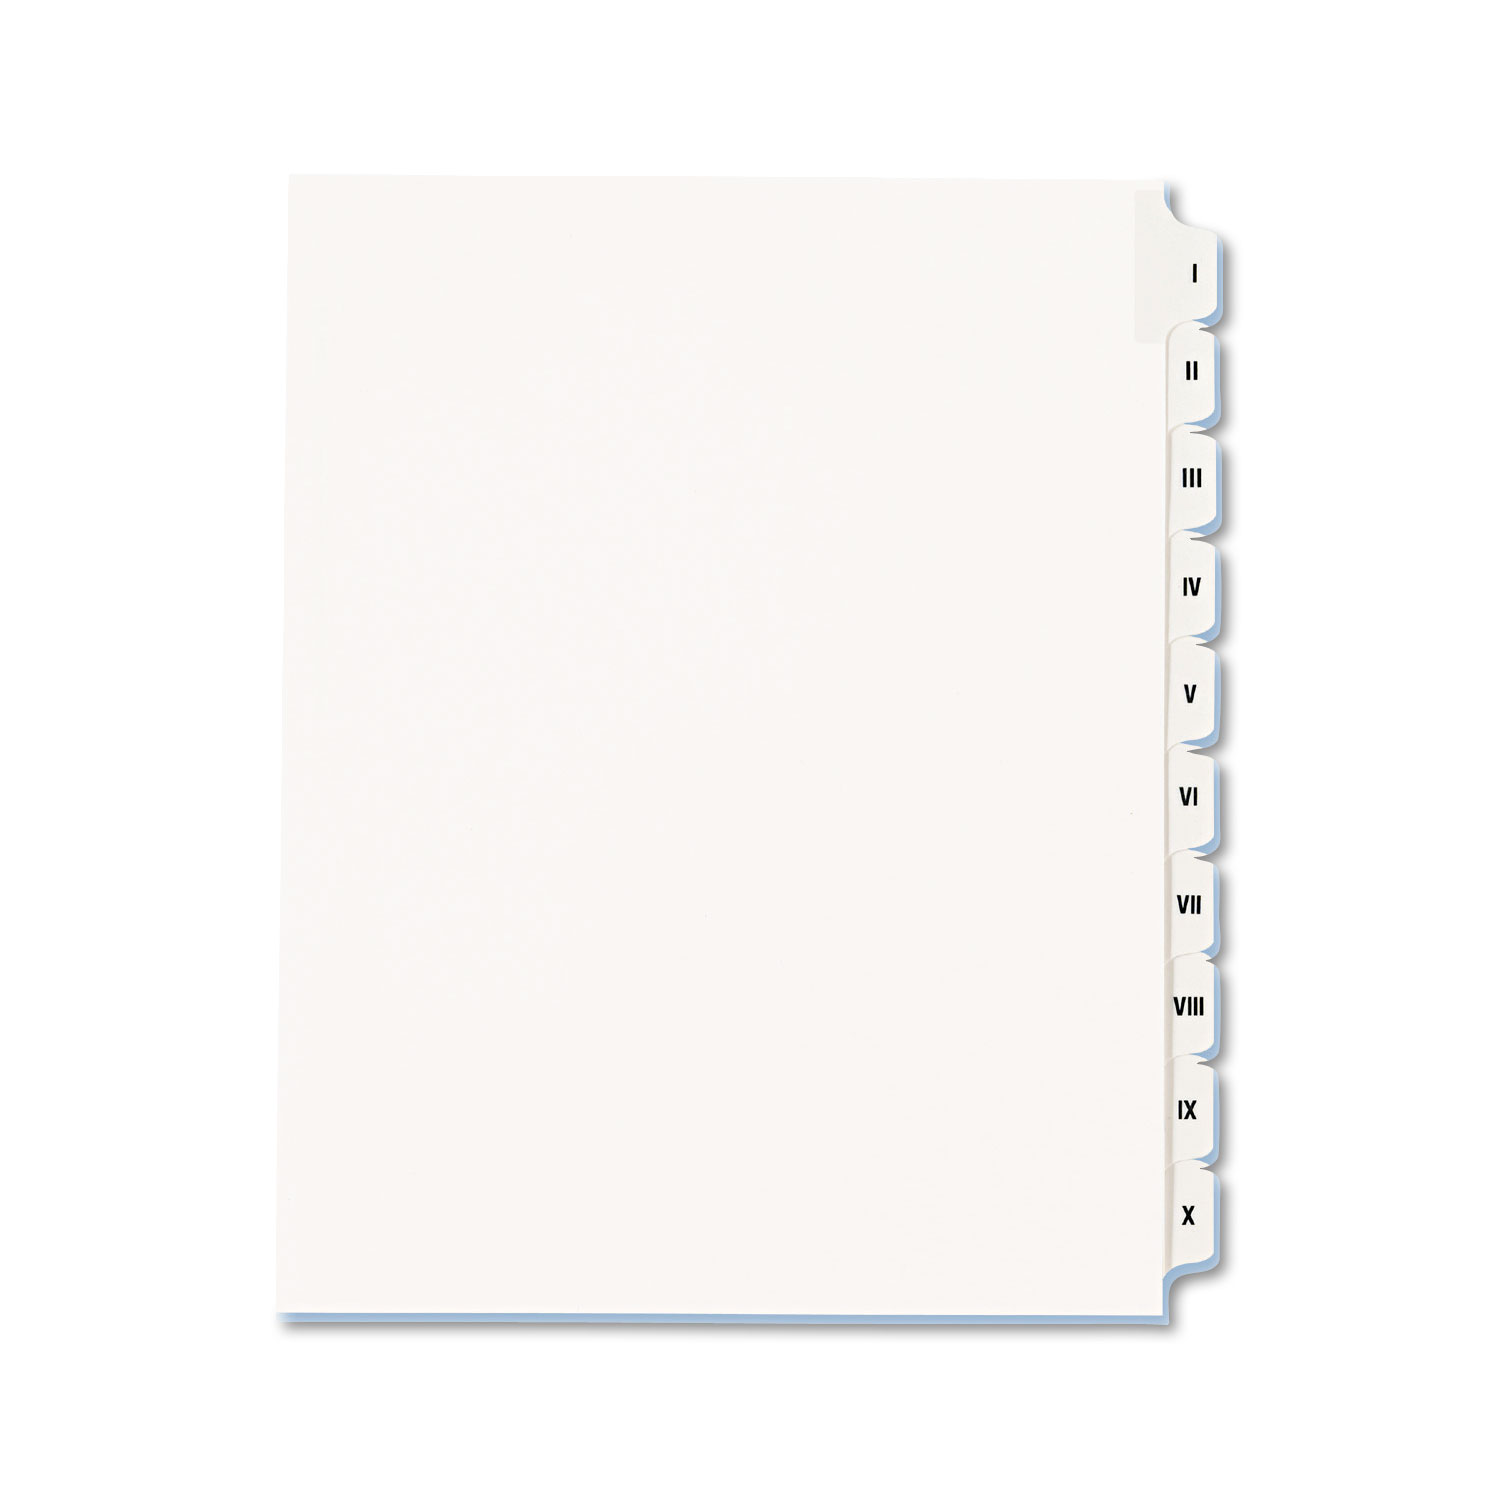  Avery 82319 Preprinted Legal Exhibit Side Tab Index Dividers, Allstate Style, 10-Tab, I to X, 11 x 8.5, White, 1 Set (AVE82319) 